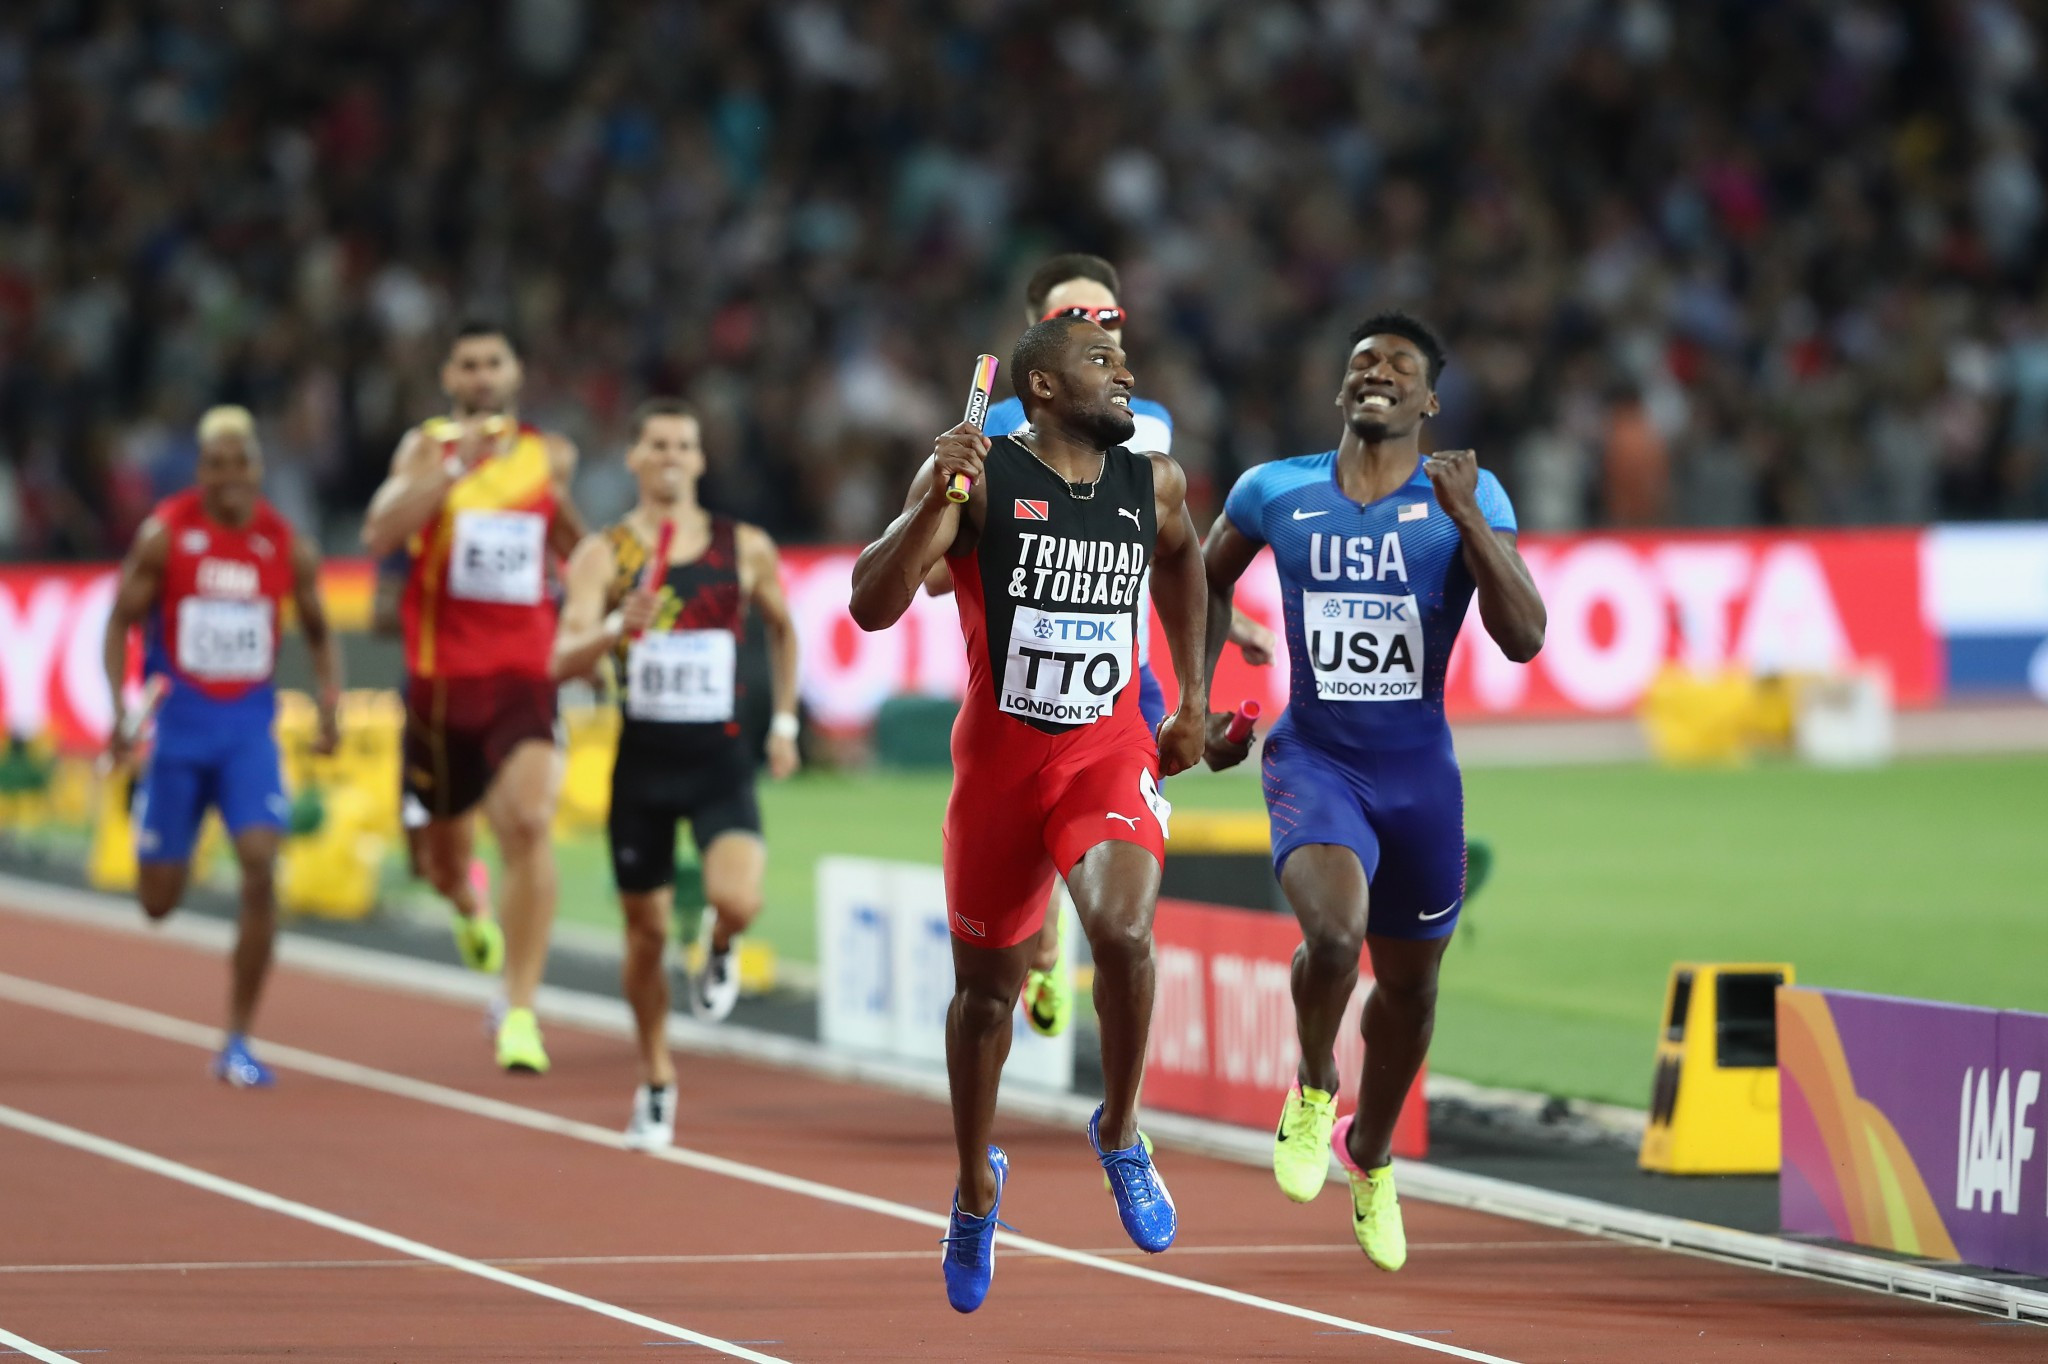 Trinidad and Tobago stunned the United States in the men's 4x400m relay to claim the last gold medal of the Championships ®Getty Images